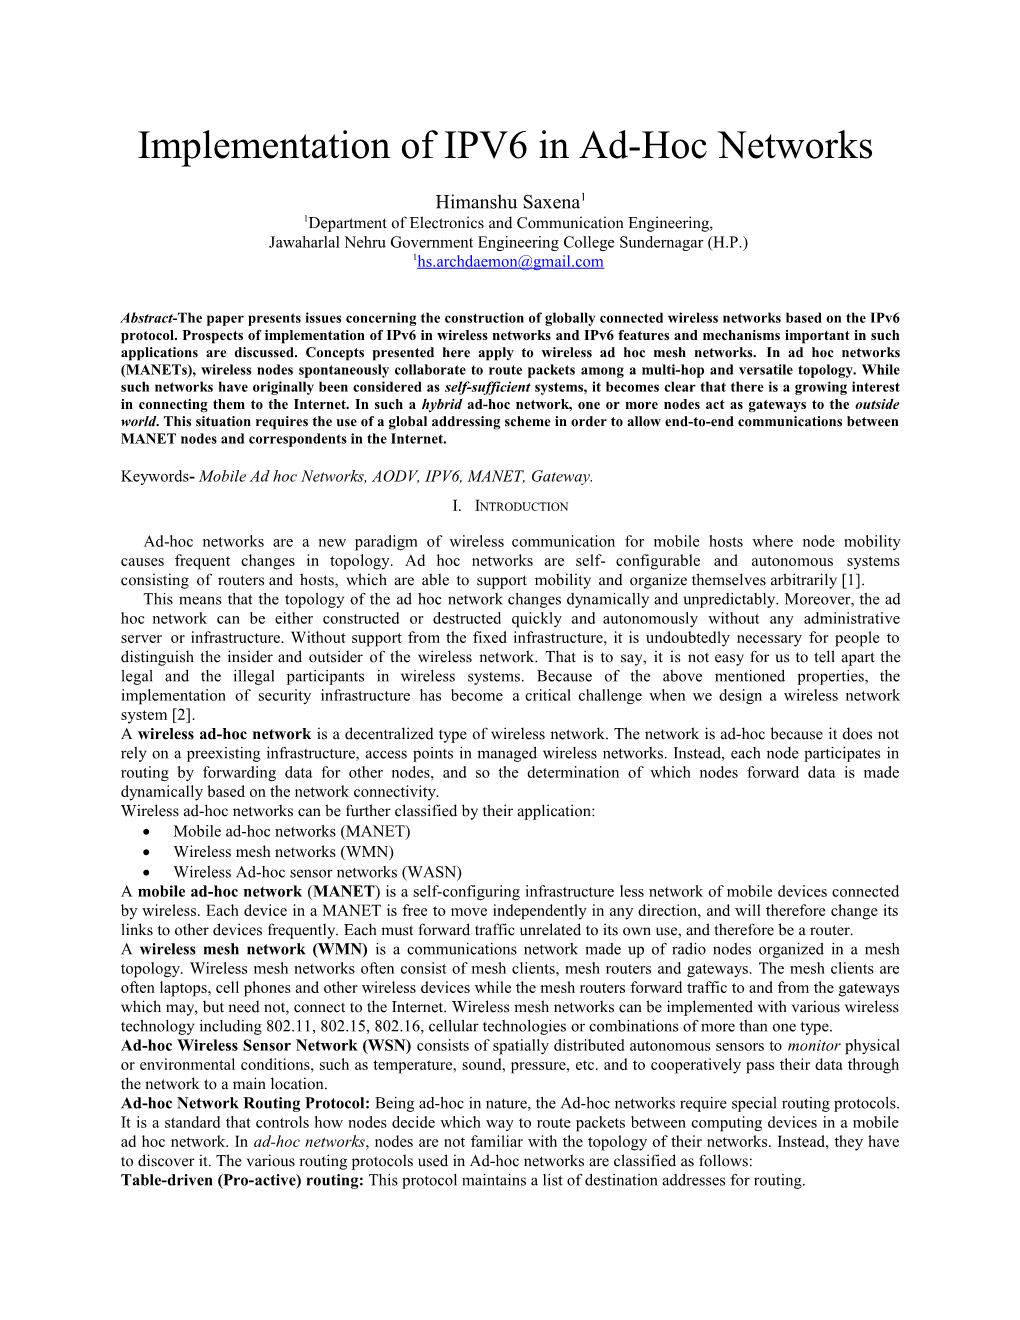 Preparation of Papers in Two-Column Format for the Proceedings of the 2004 Sarnoff Symposium s1